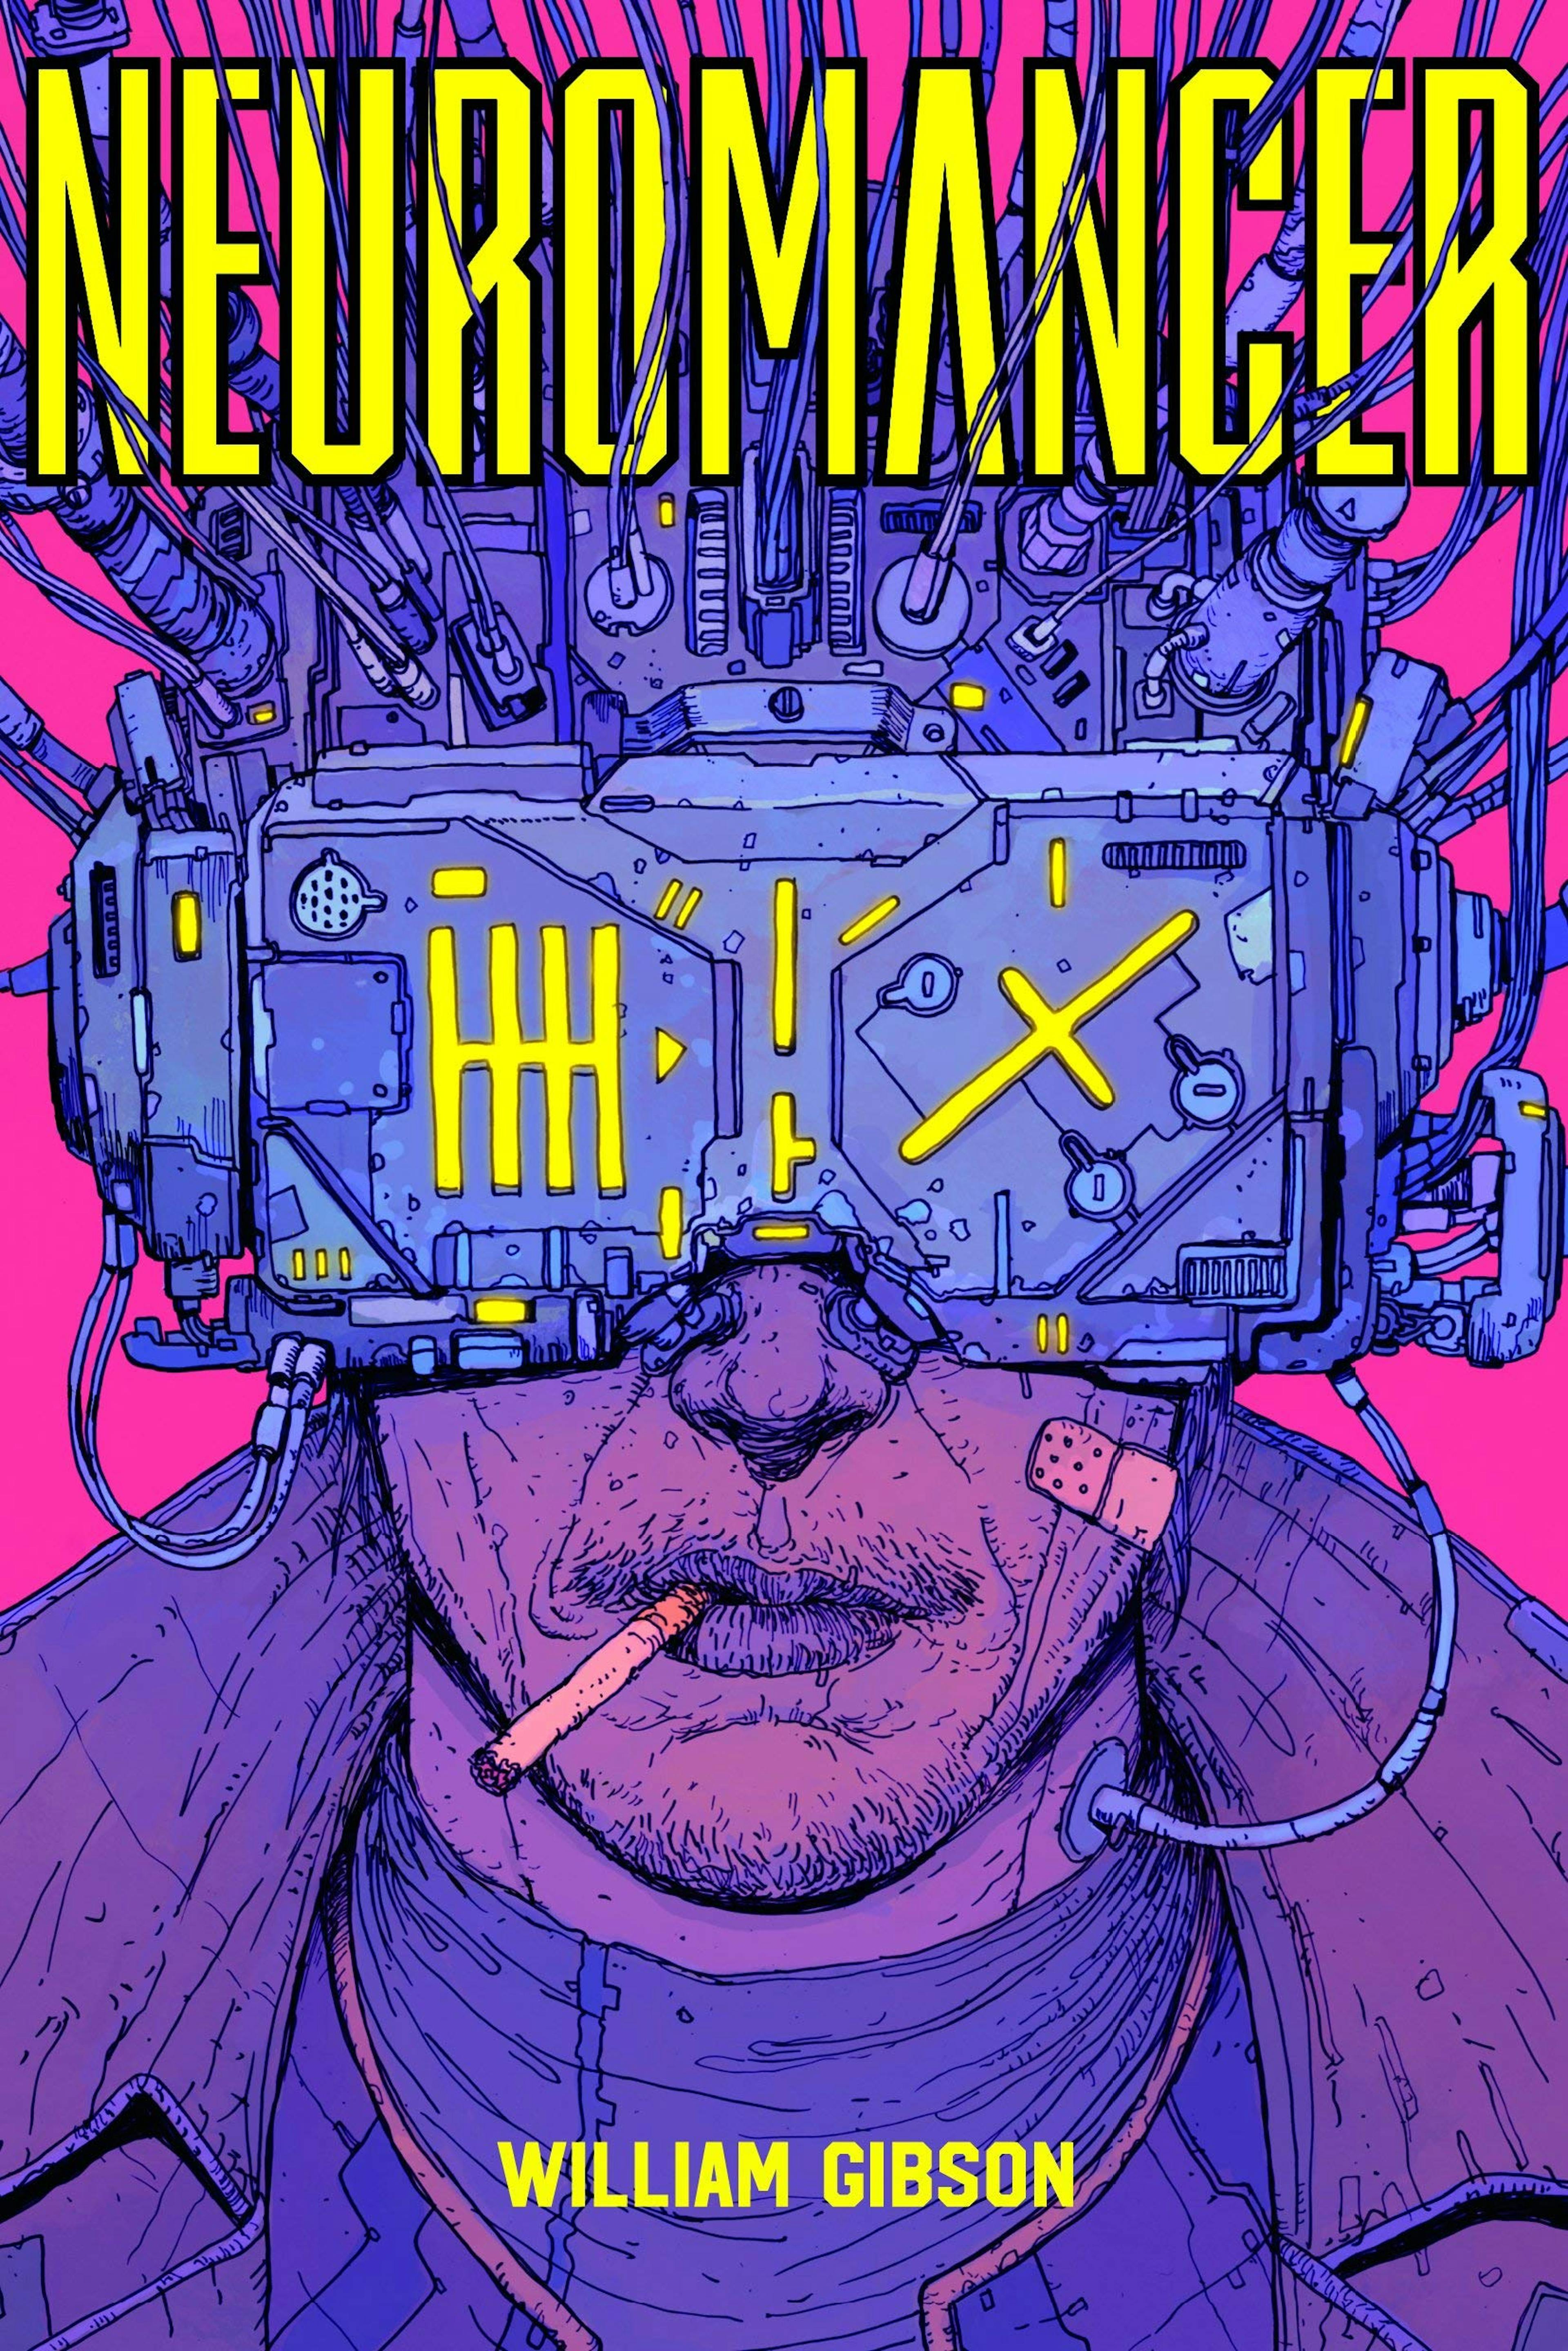 The first part of the trilogy - "Neuromancer" (cover by Editions Aleph, Brazil)